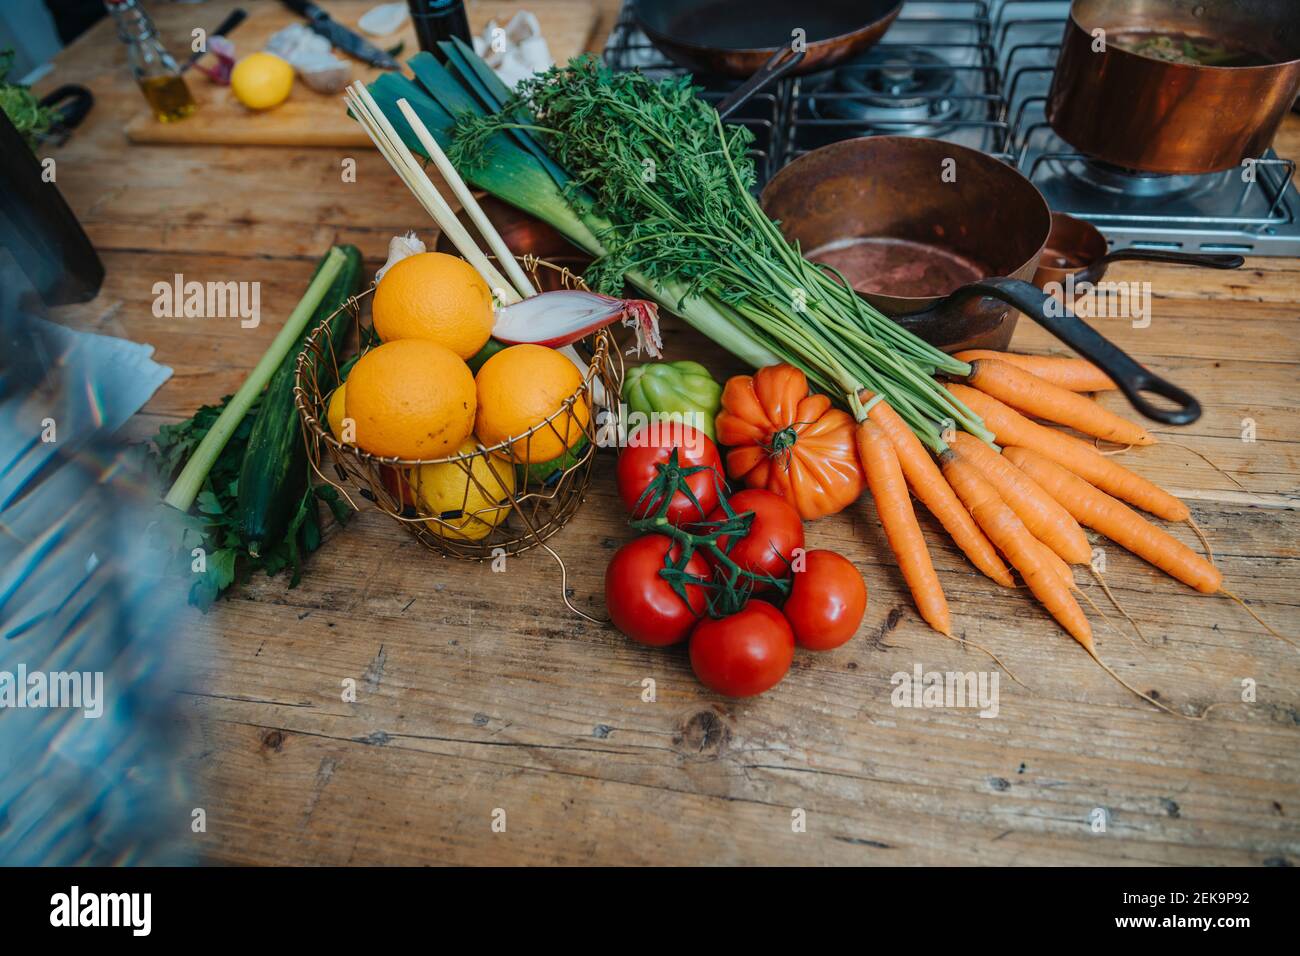 Fruits and vegetables by kitchen utensil on kitchen island Stock Photo